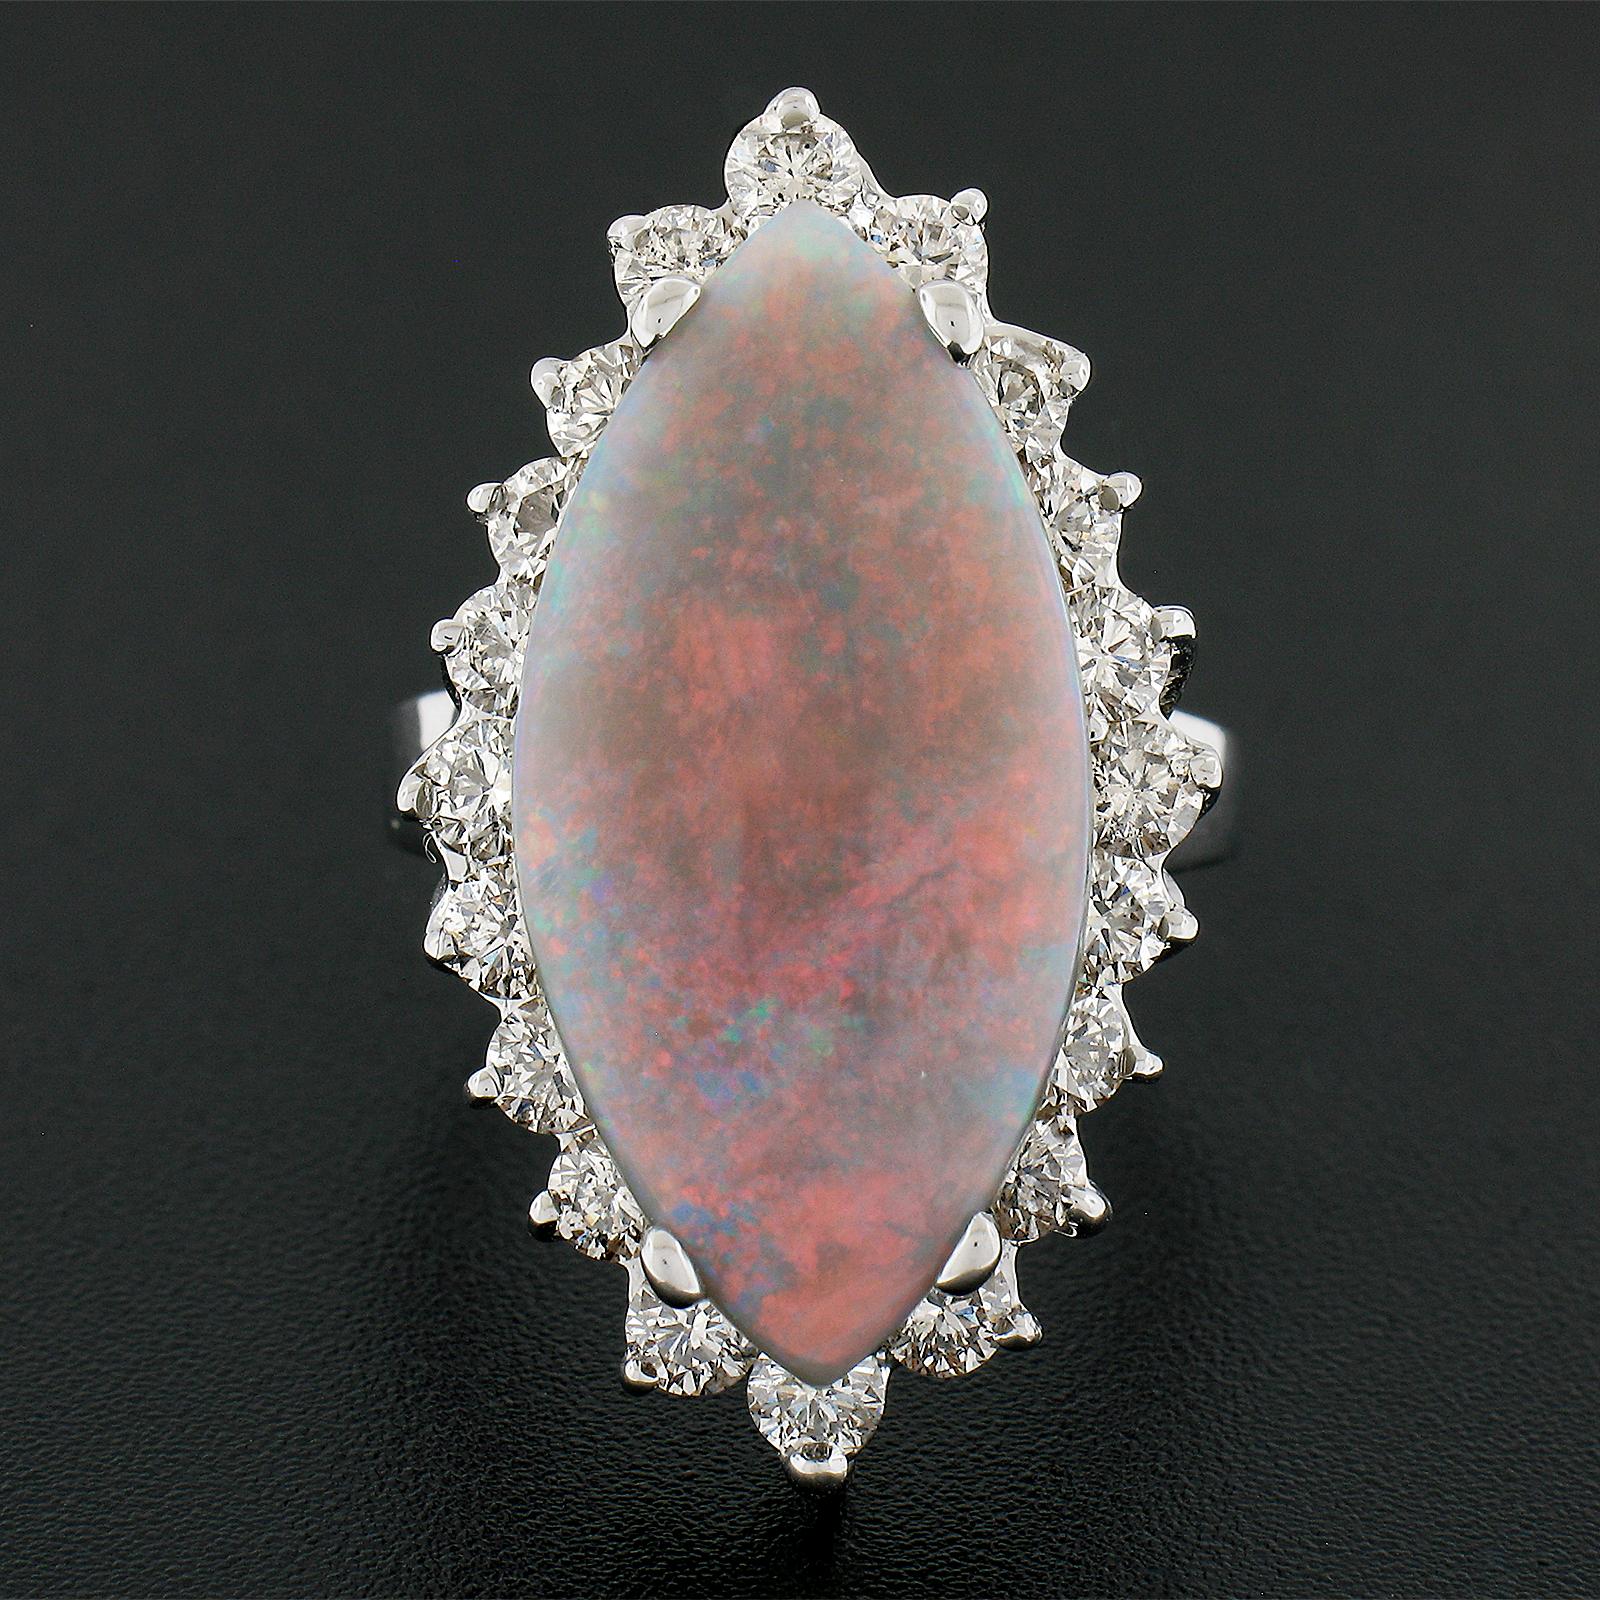 This stunning and uniquely shaped vintage cocktail ring features a large and absolutely breathtaking cabochon marquise opal stone that displays fiery and obvious orange and red play of colors over its natural gray and untreated color. The center